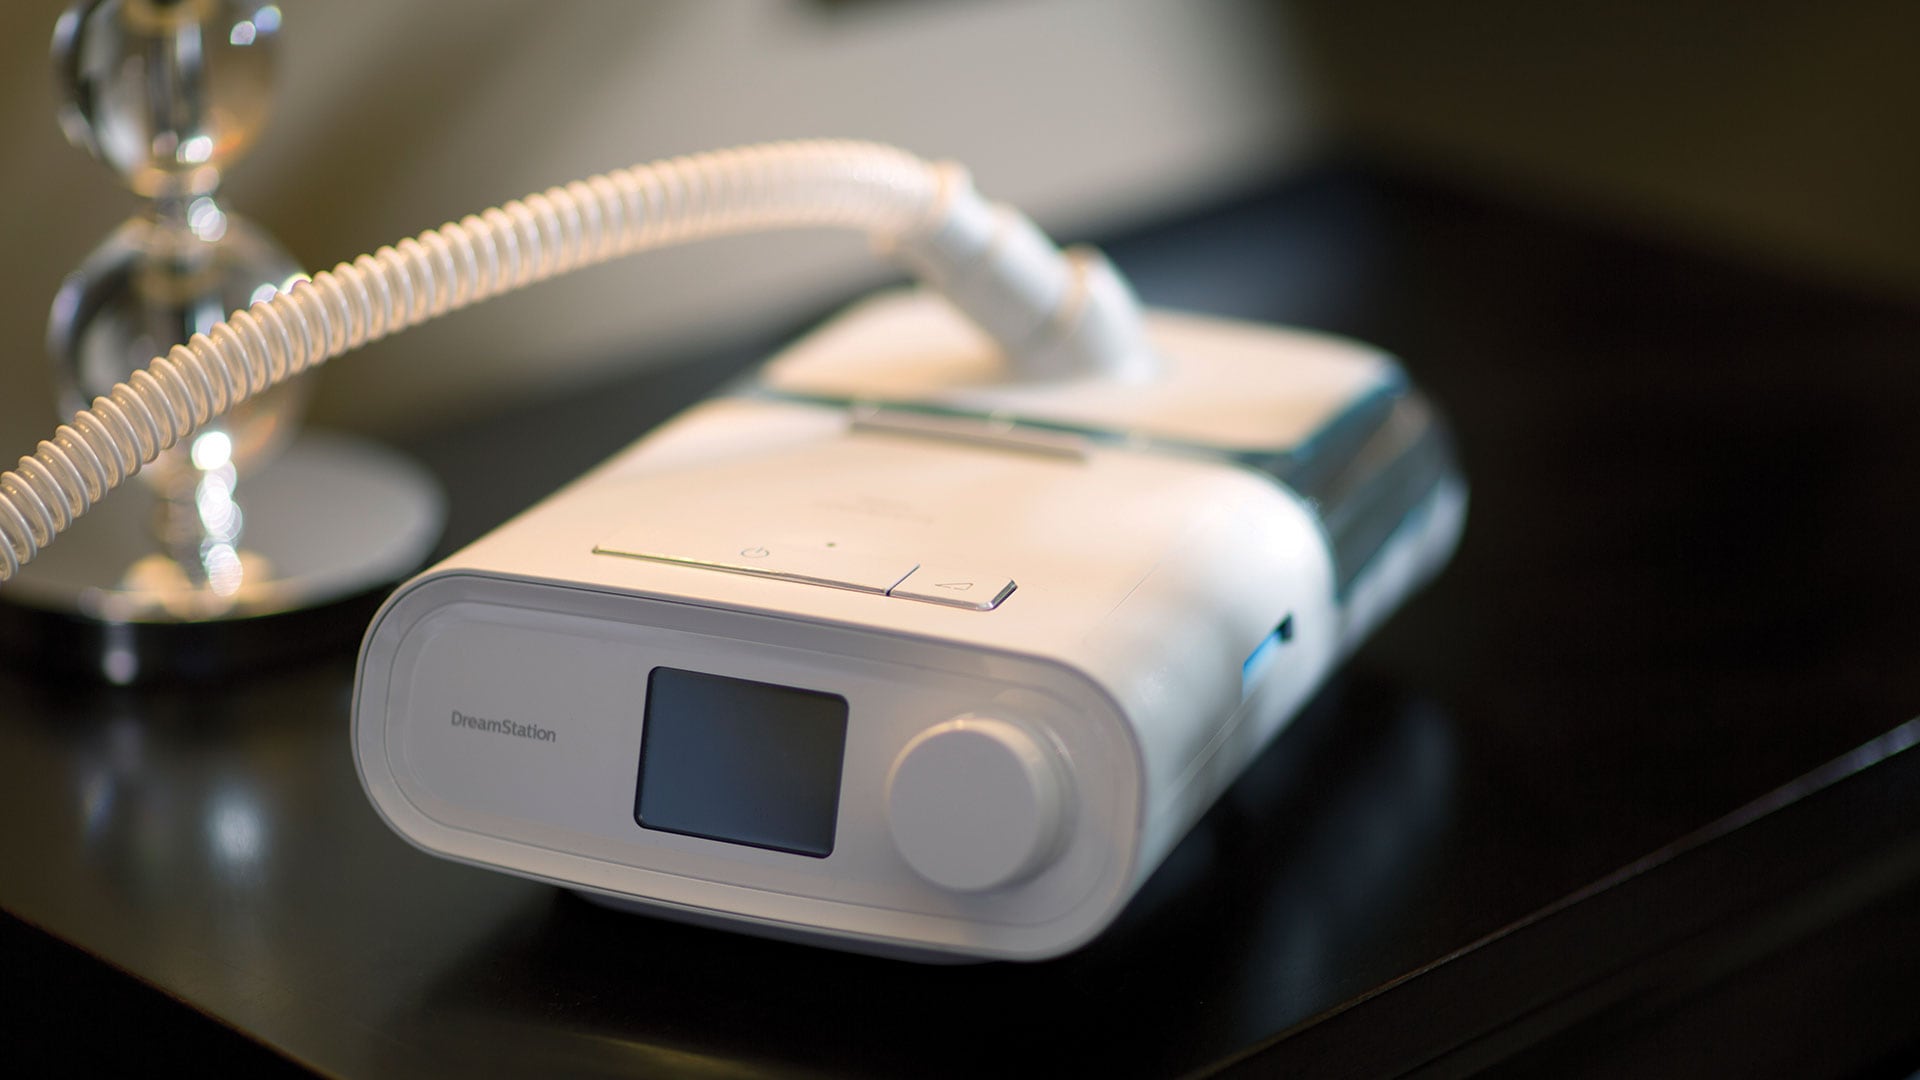 Philips provides update on completed set of test results for CPAP/BiPAP sleep therapy devices